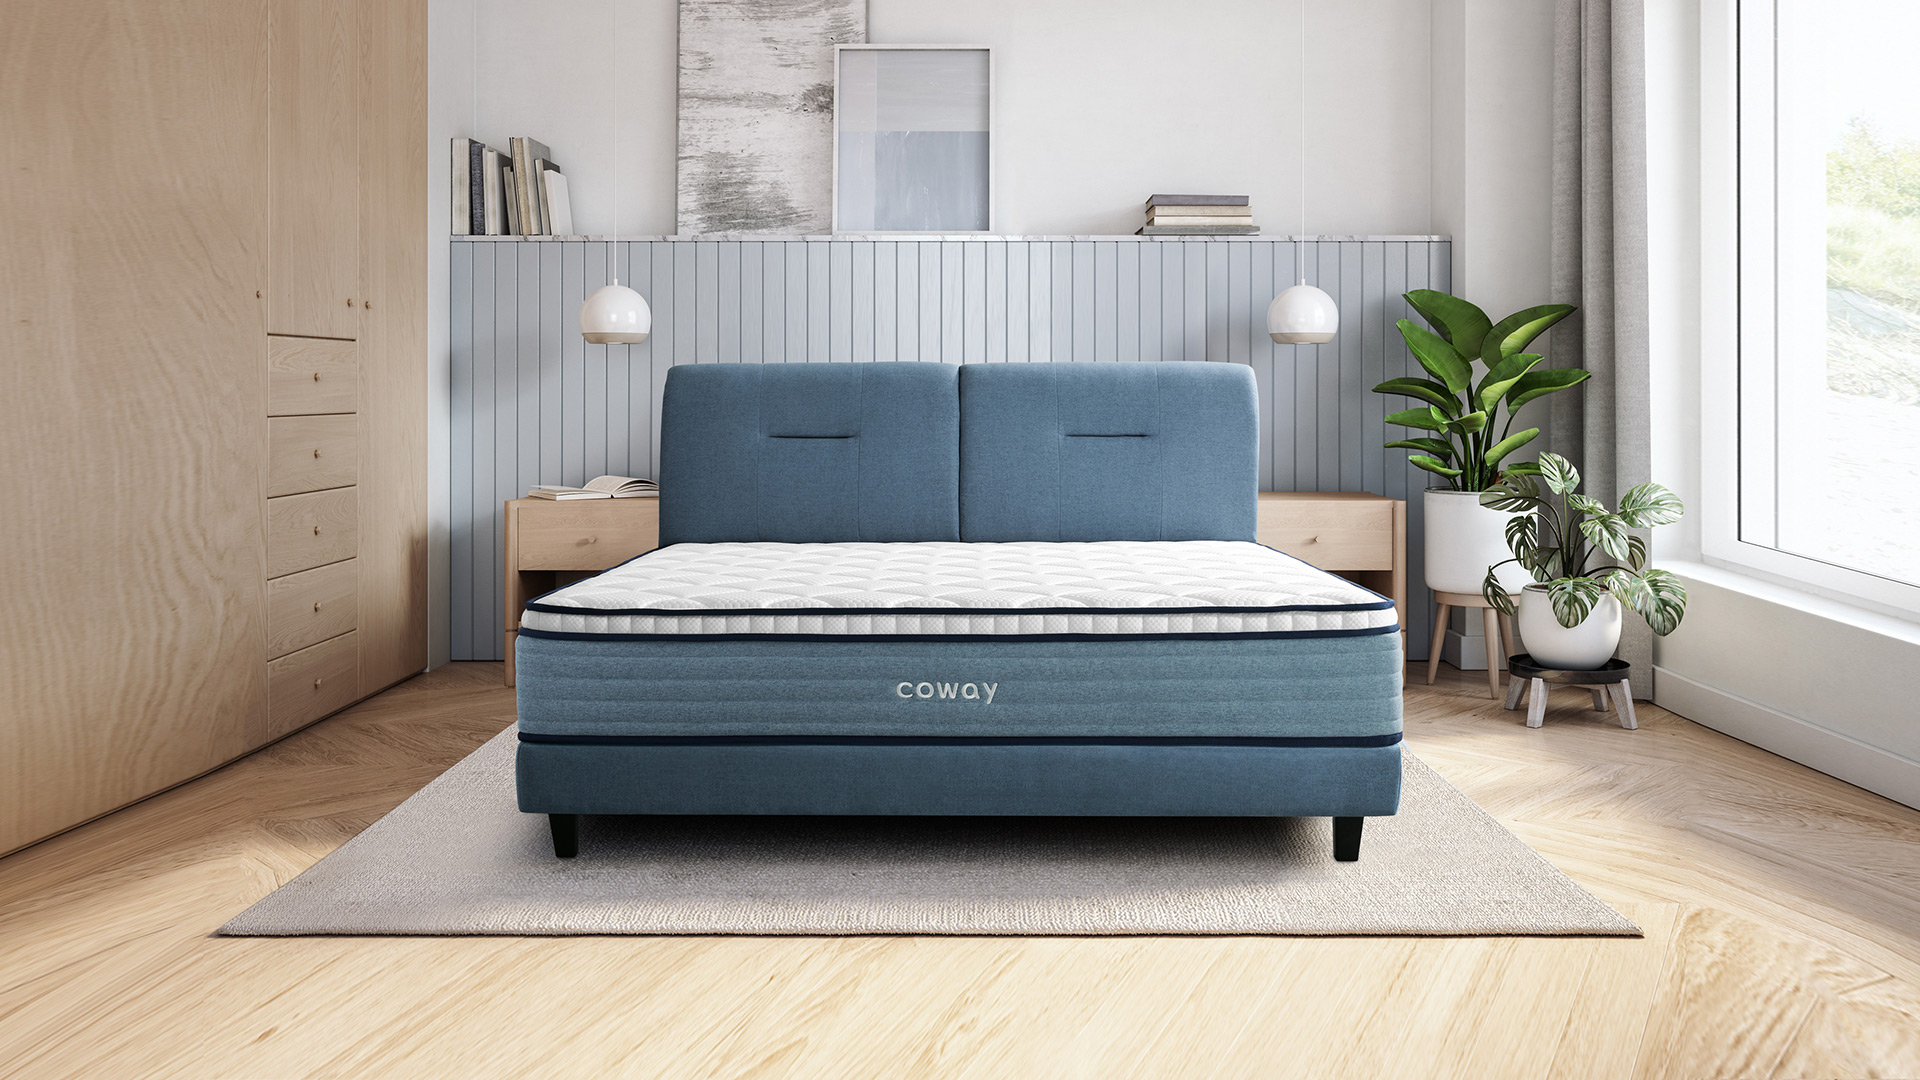 Coway Eco Lite Series Mattress - Fits In Any Kind Of Room Design